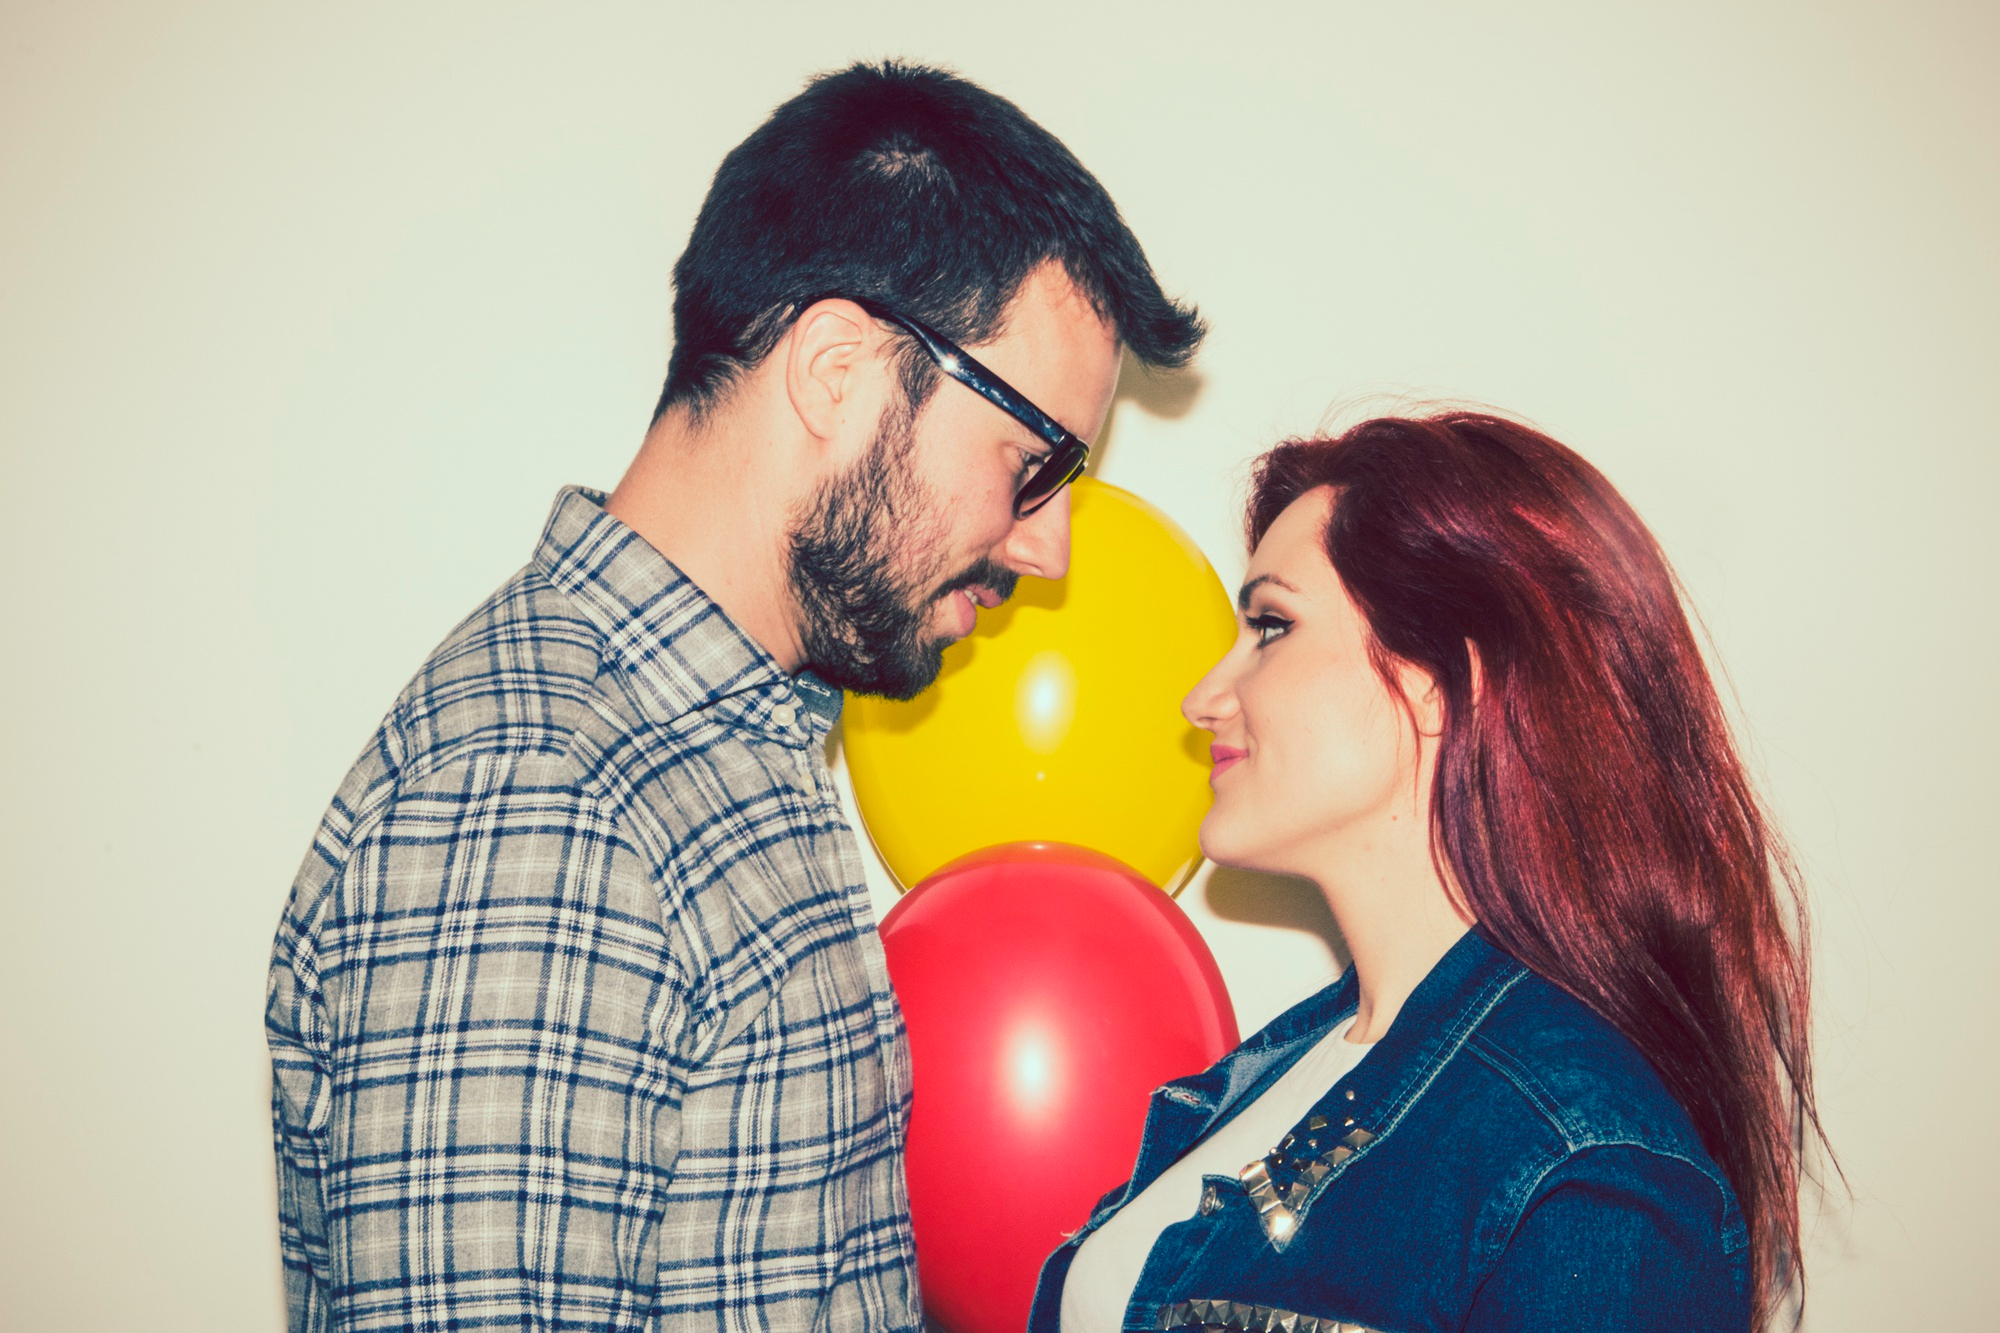 A couple looking at each other with balloons in the background | Source: Freepik